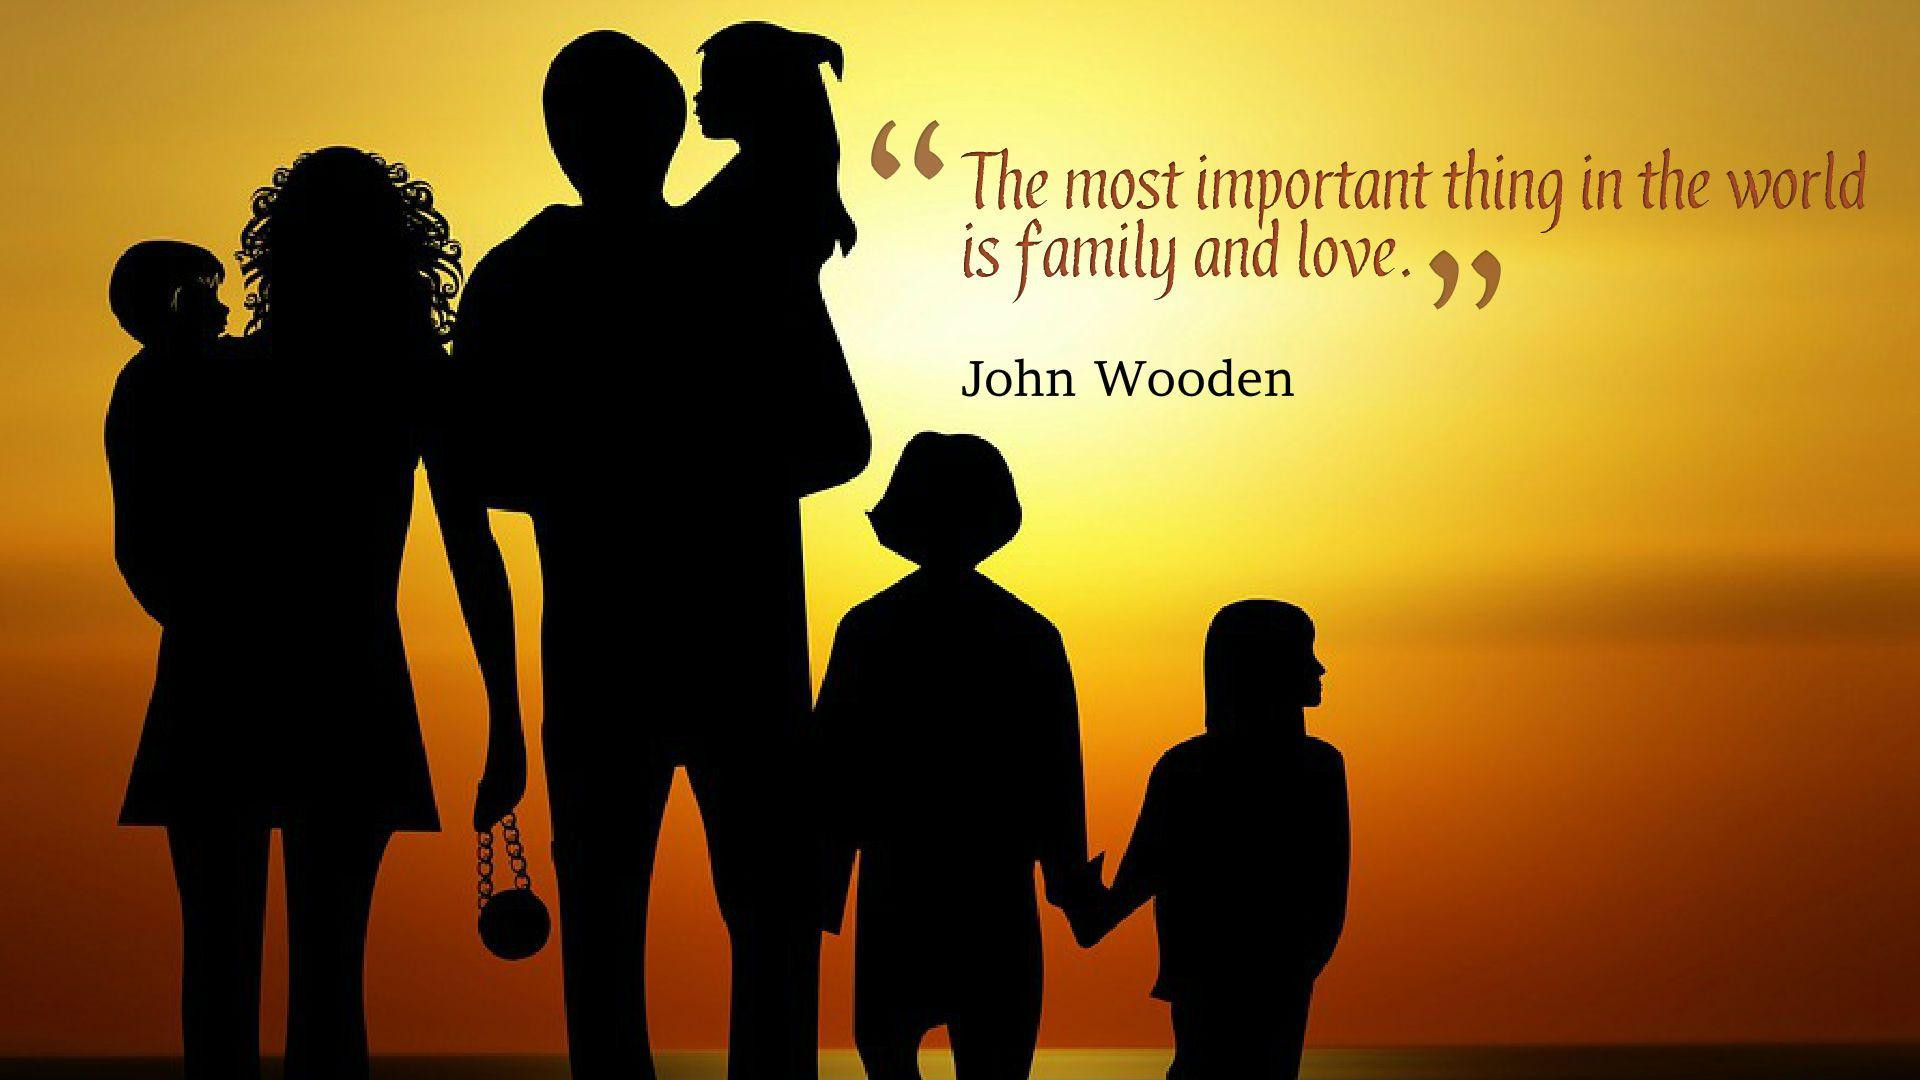 Family Wallpapers With Quotes
 Family Quotes Wallpapers Wallpaper Cave